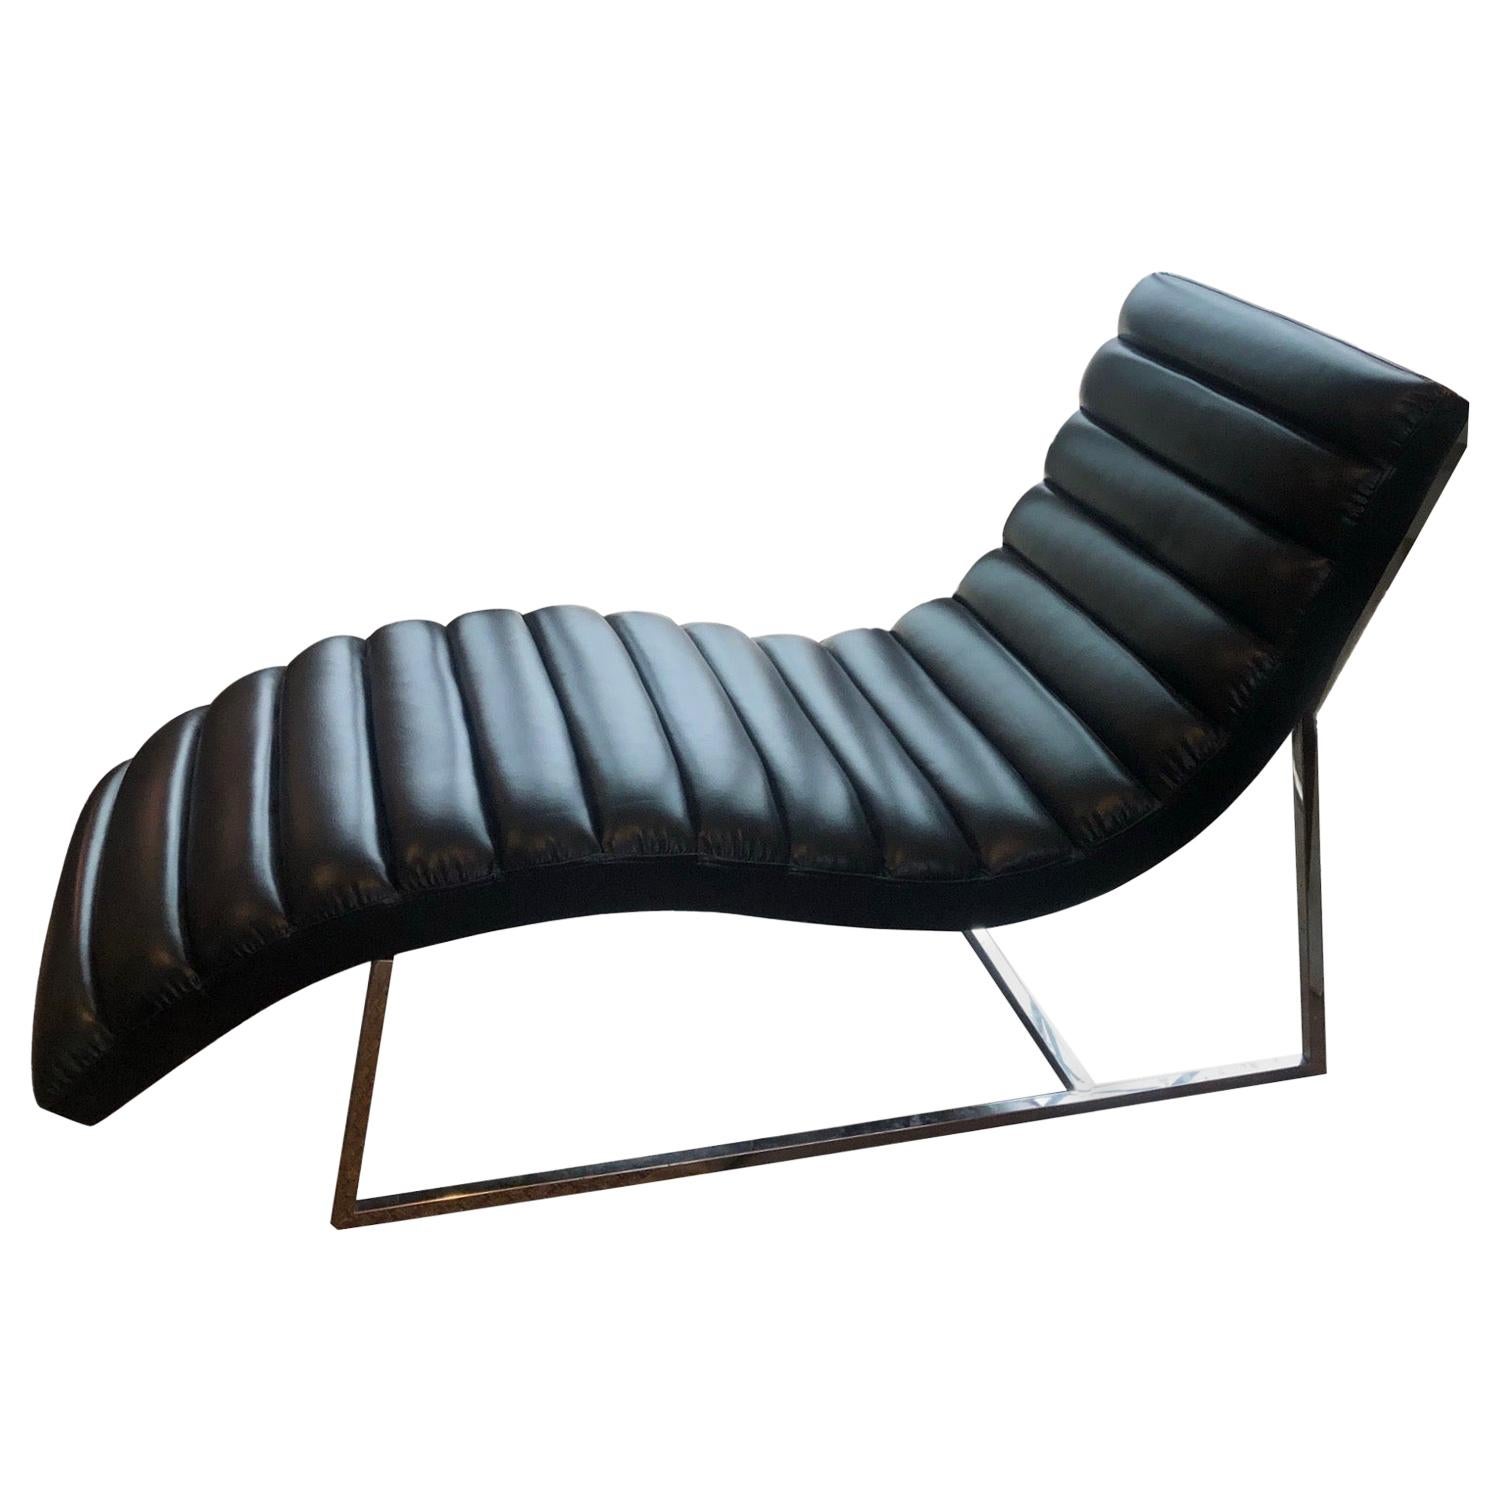 Mid-Century Modern Style Black Leather Channel Chaise Lounge